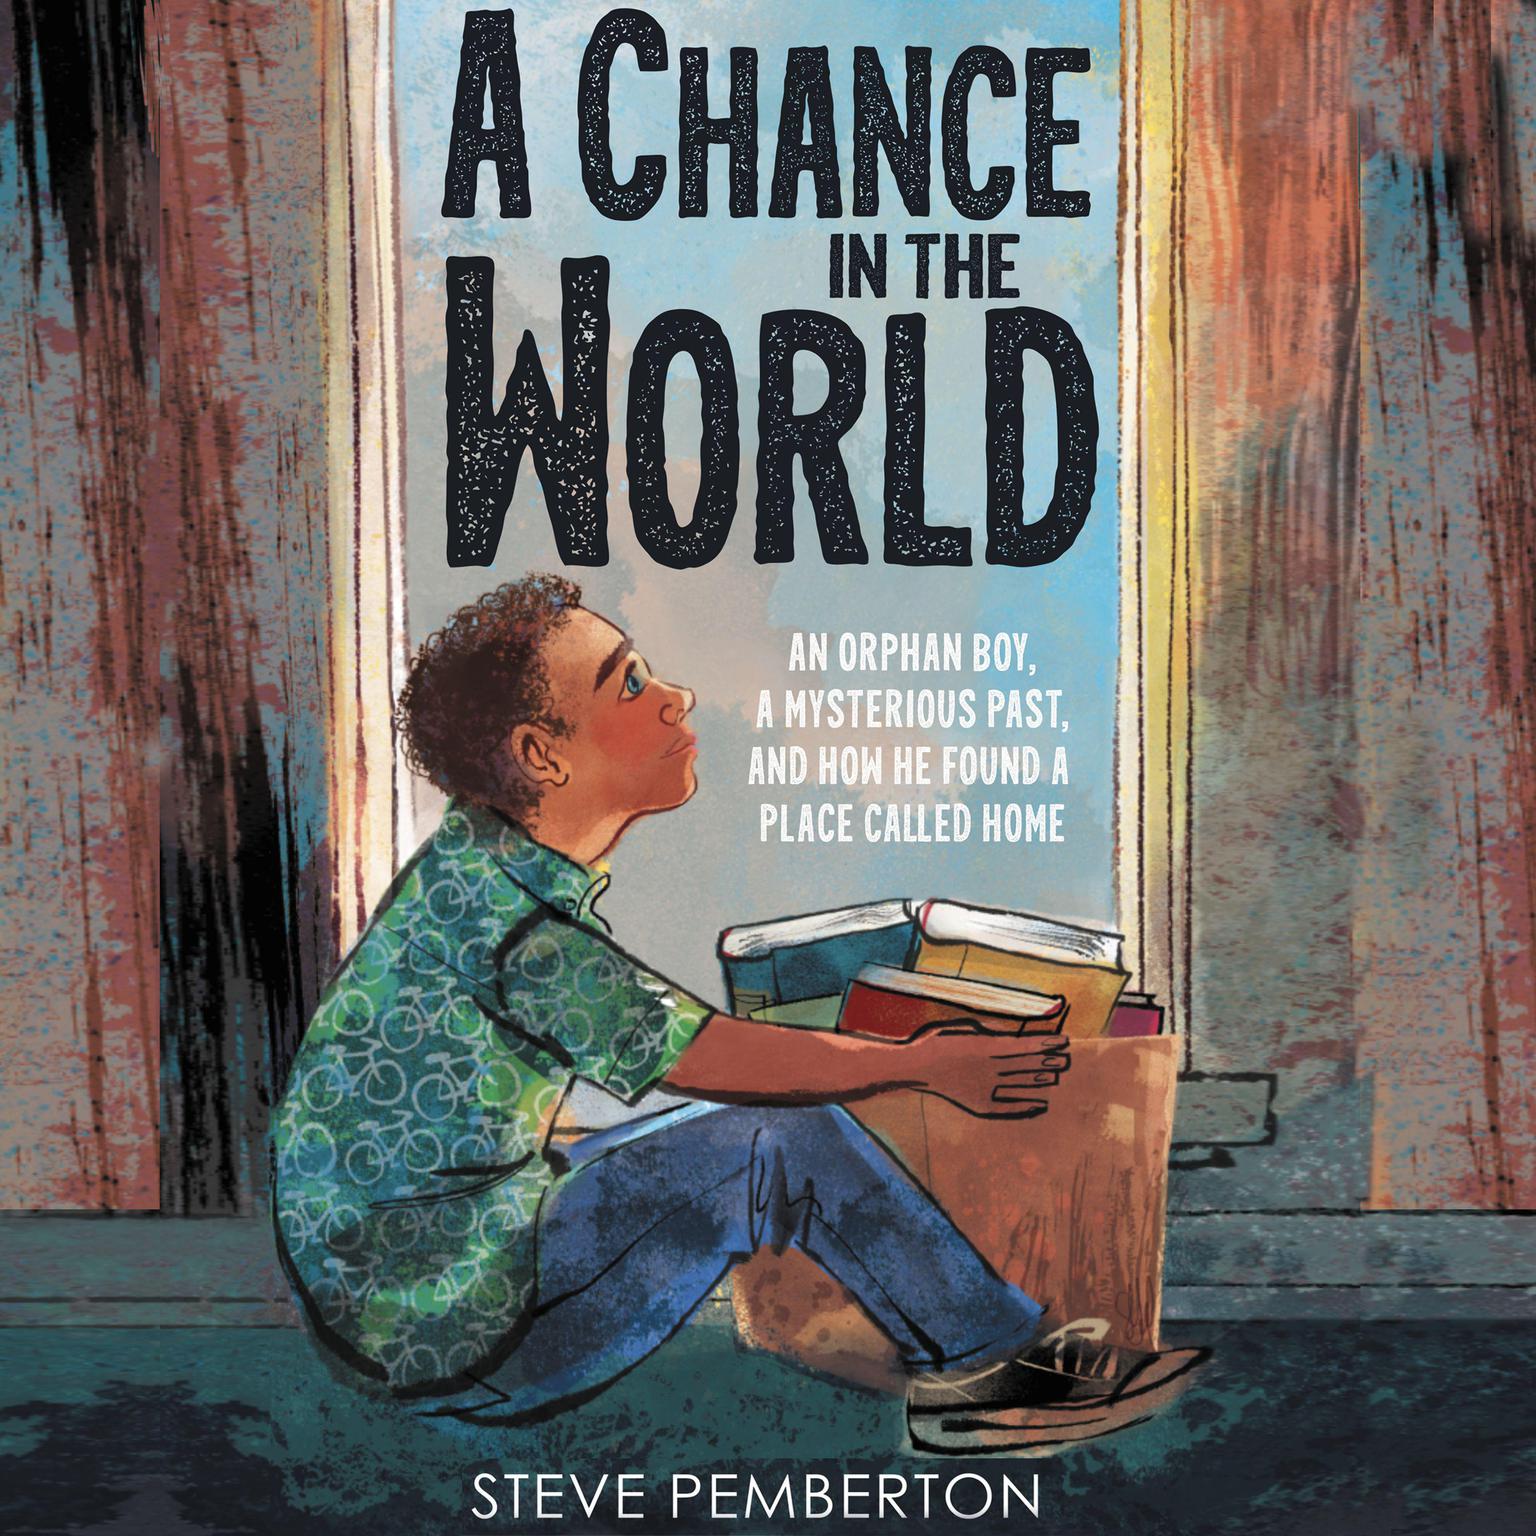 A Chance in the World (Young Readers Edition): An Orphan Boy, a Mysterious Past, and How He Found a Place Called Home Audiobook, by Steve Pemberton